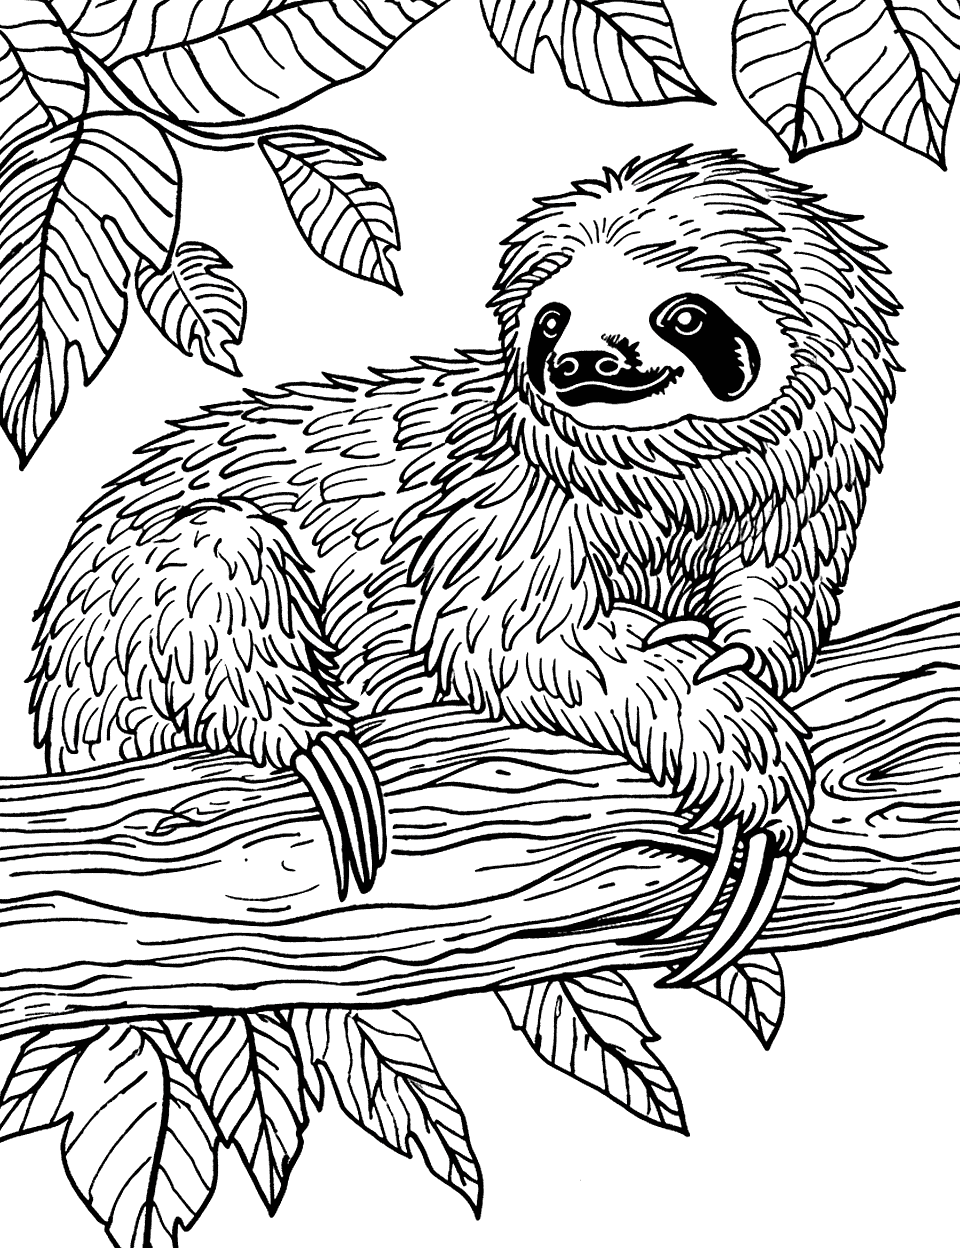 Sloth Chilling Coloring Page - A sloth chilling on a log looking around curiously.